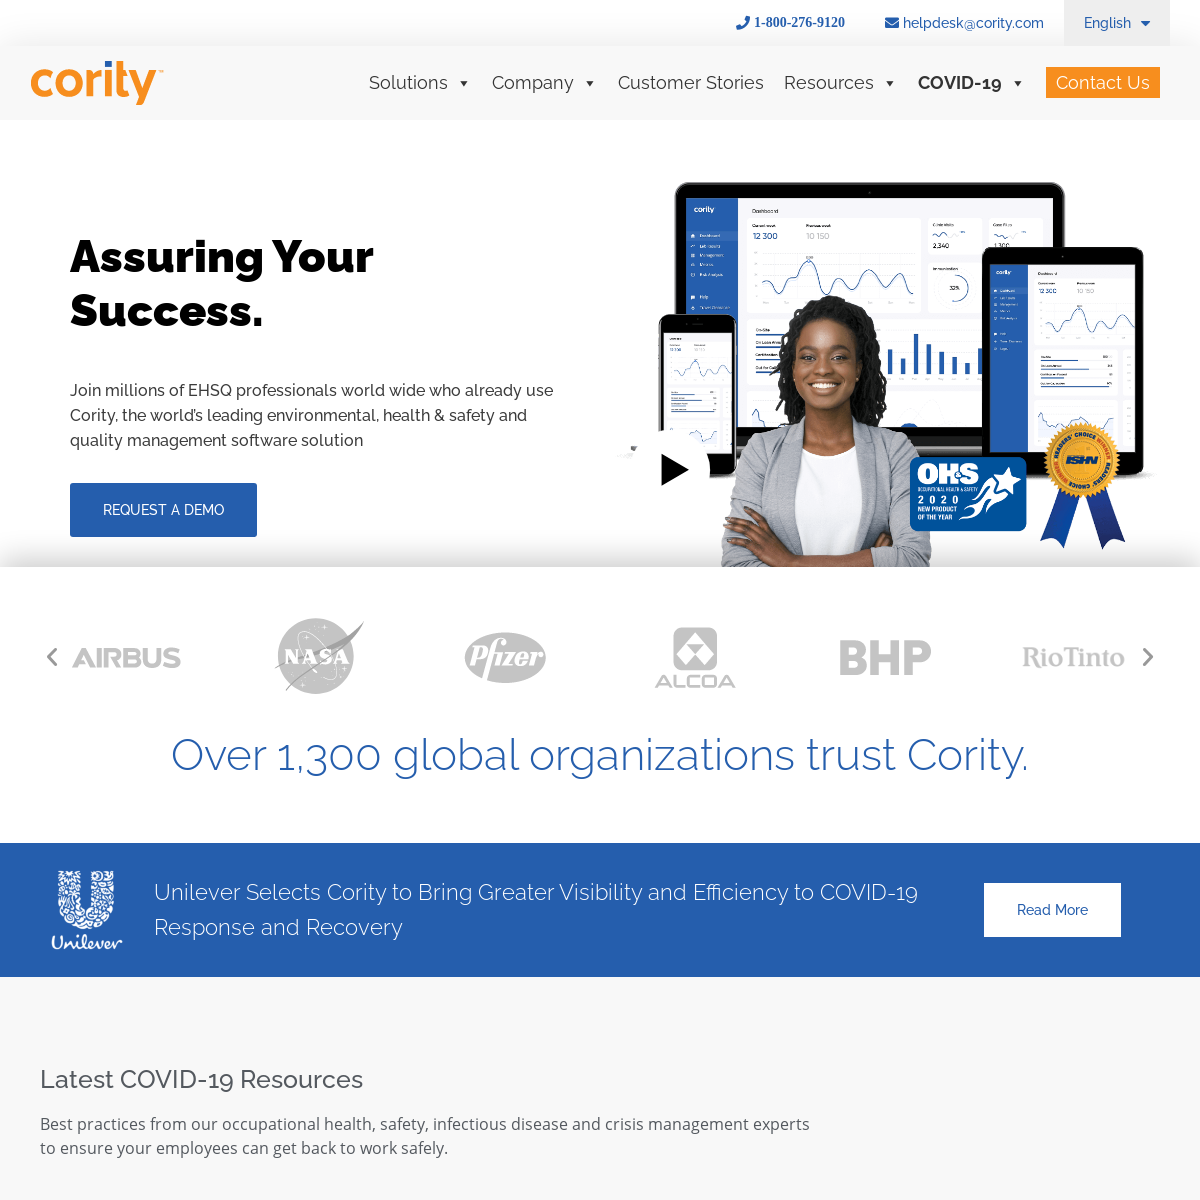 A complete backup of cority.com